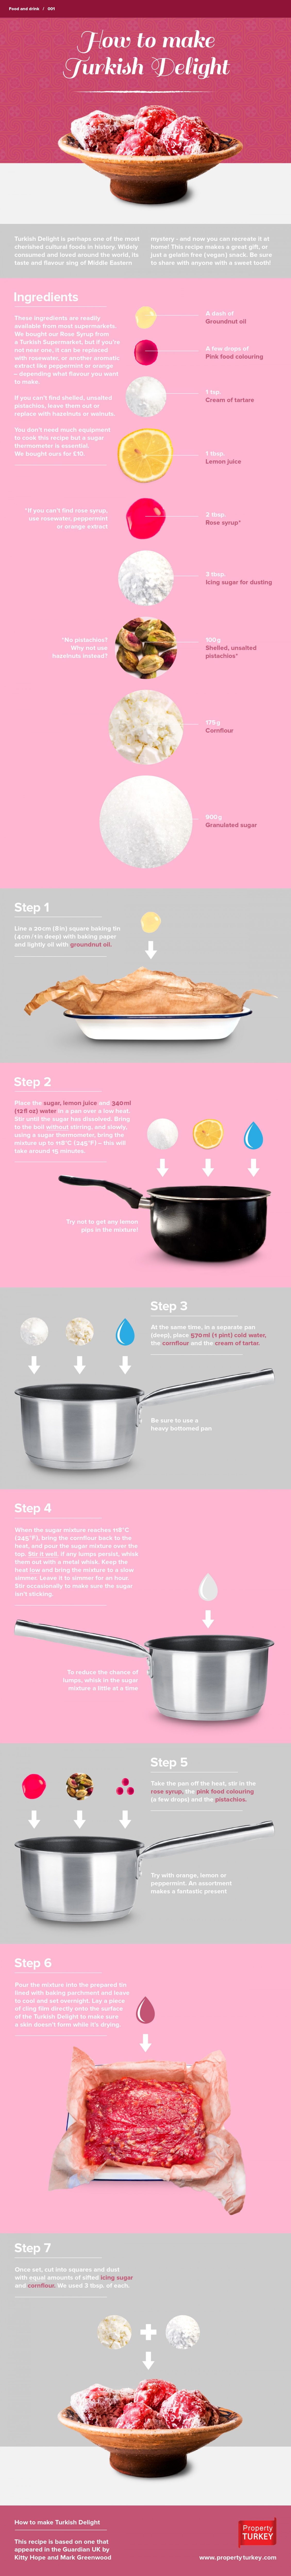 How to make Turkish Delight infographic